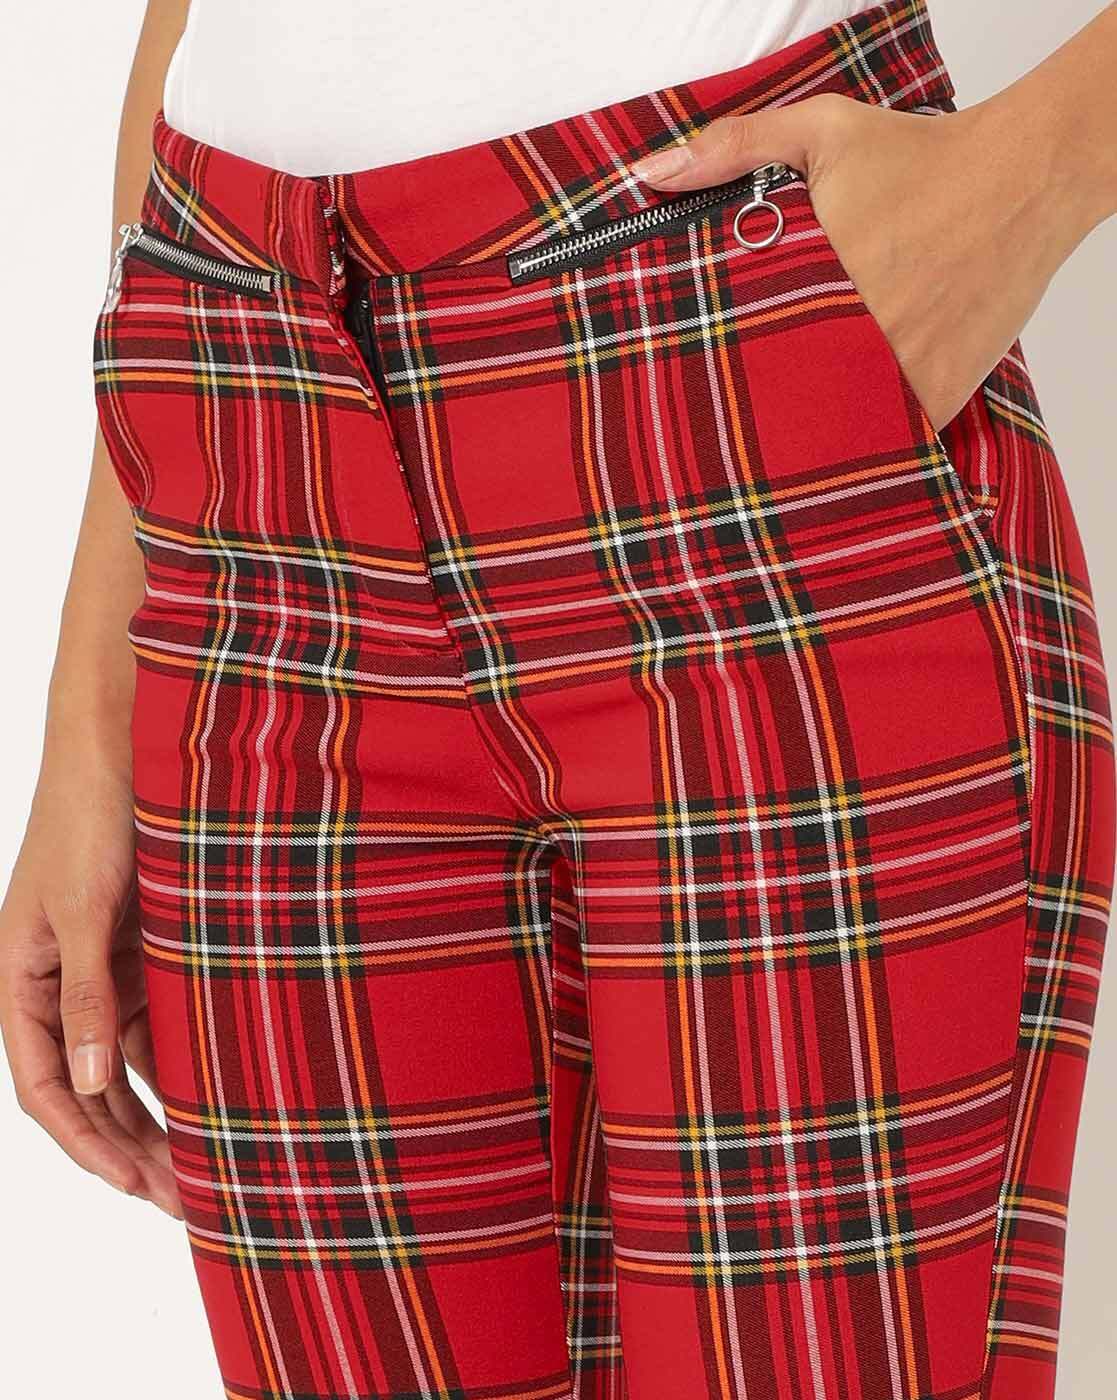 Missguided Red Plaid Tapered Pants  Women pants casual Checked trousers  outfit Red plaid pants